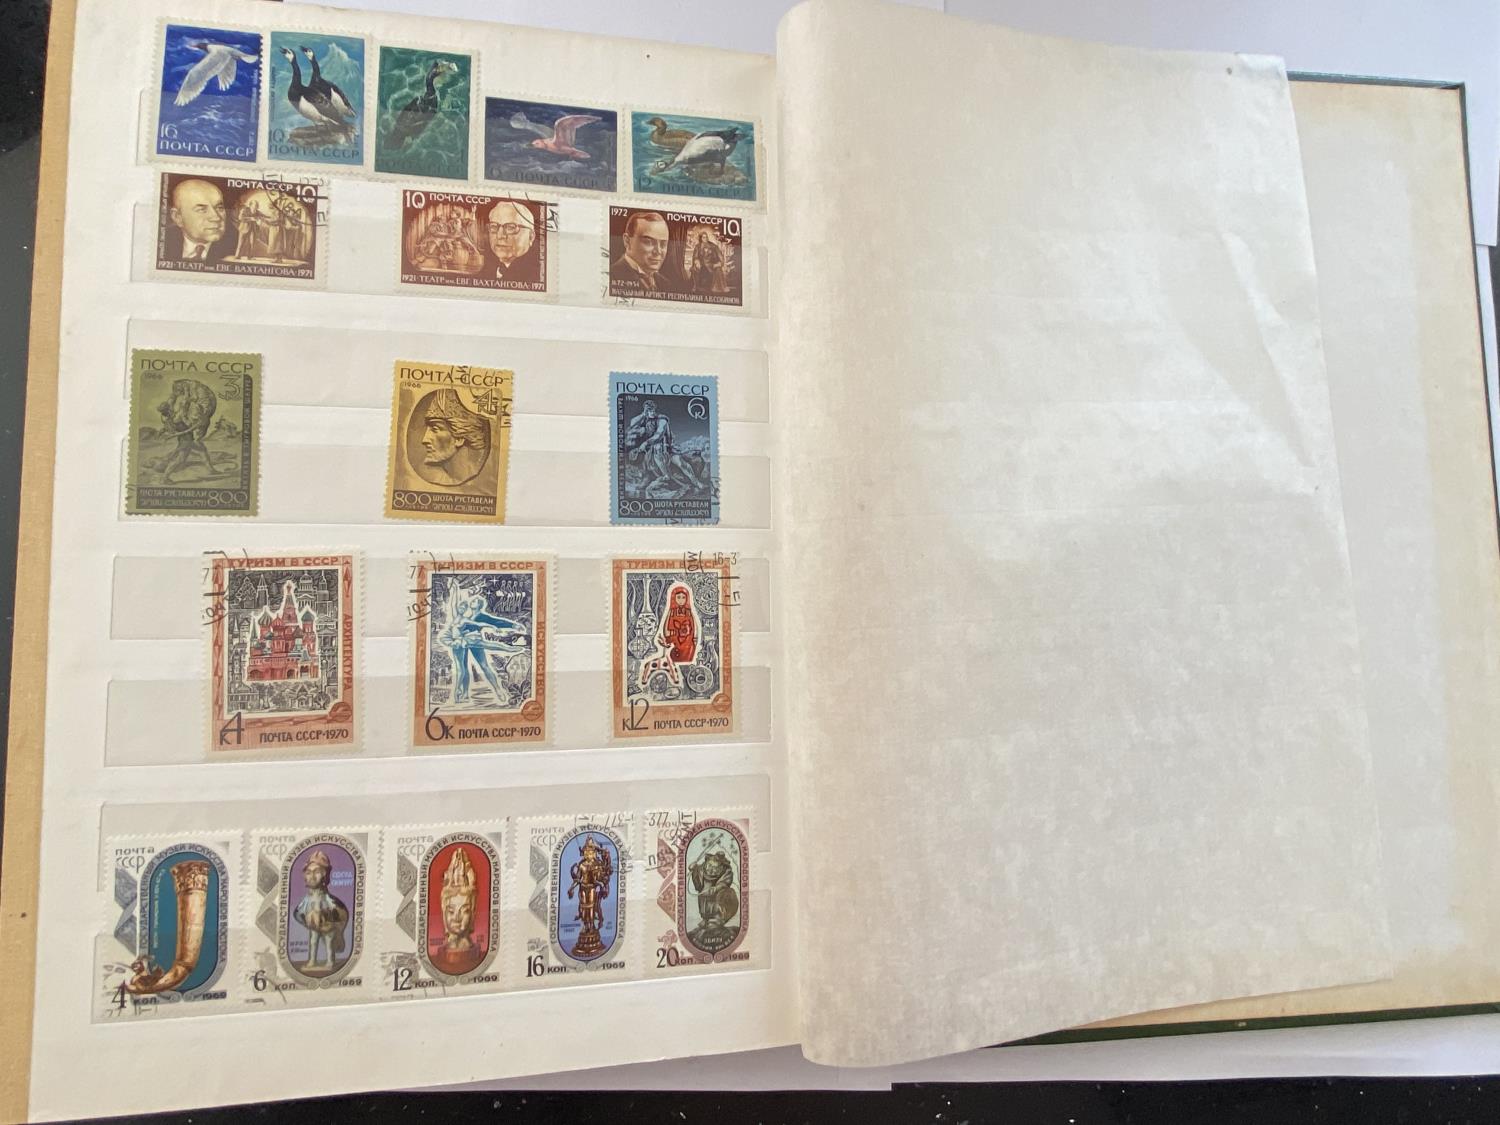 A STAMP ALBUM CONTAINING RUSSIAN STAMPS - Image 5 of 5